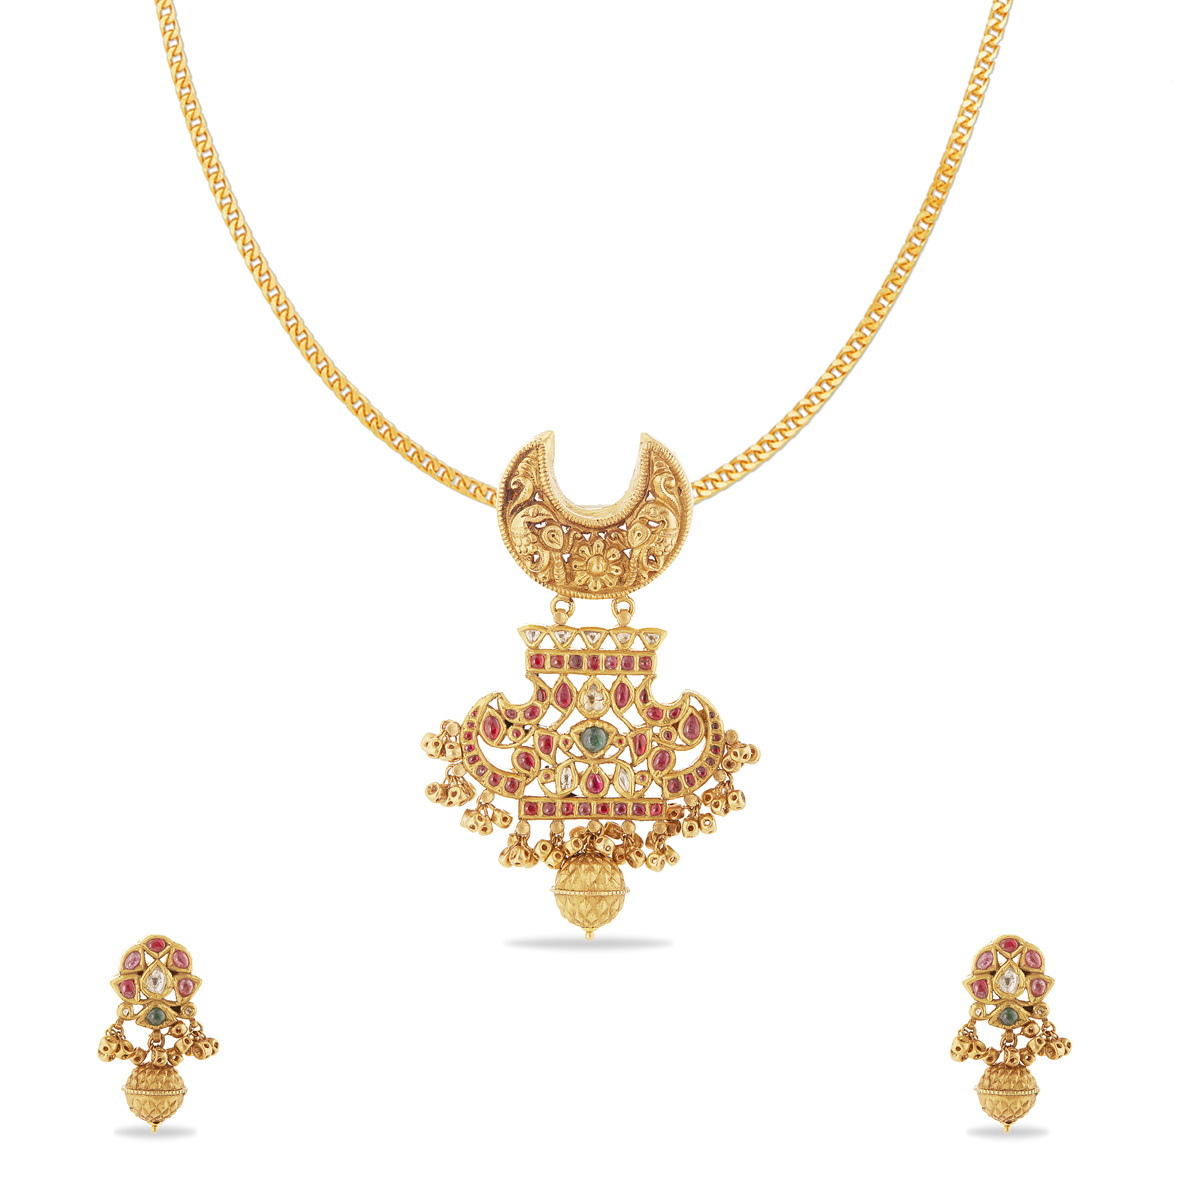 Queen style pendent 